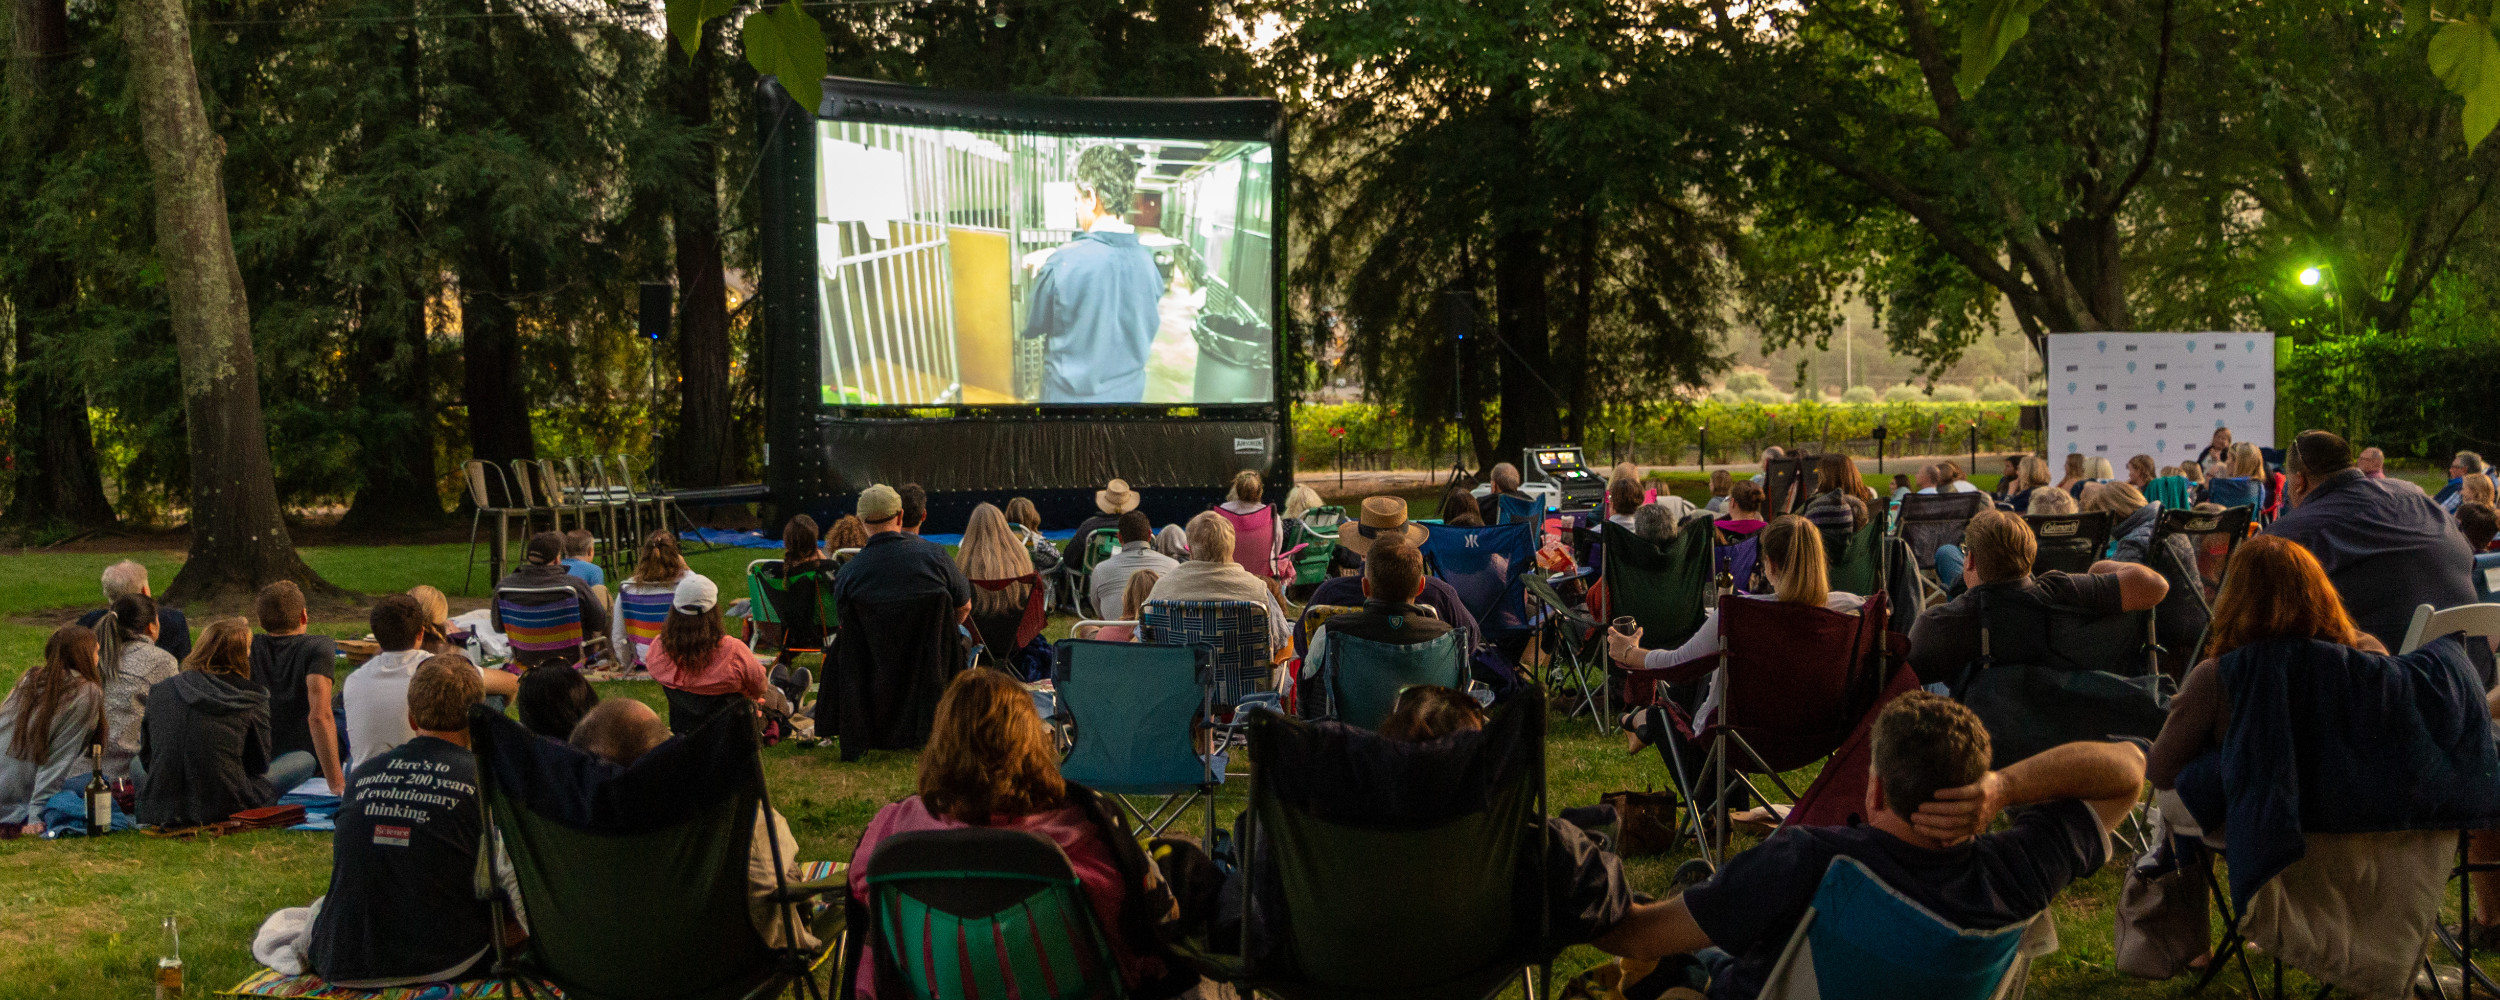 Maine-outdoor-movie-party